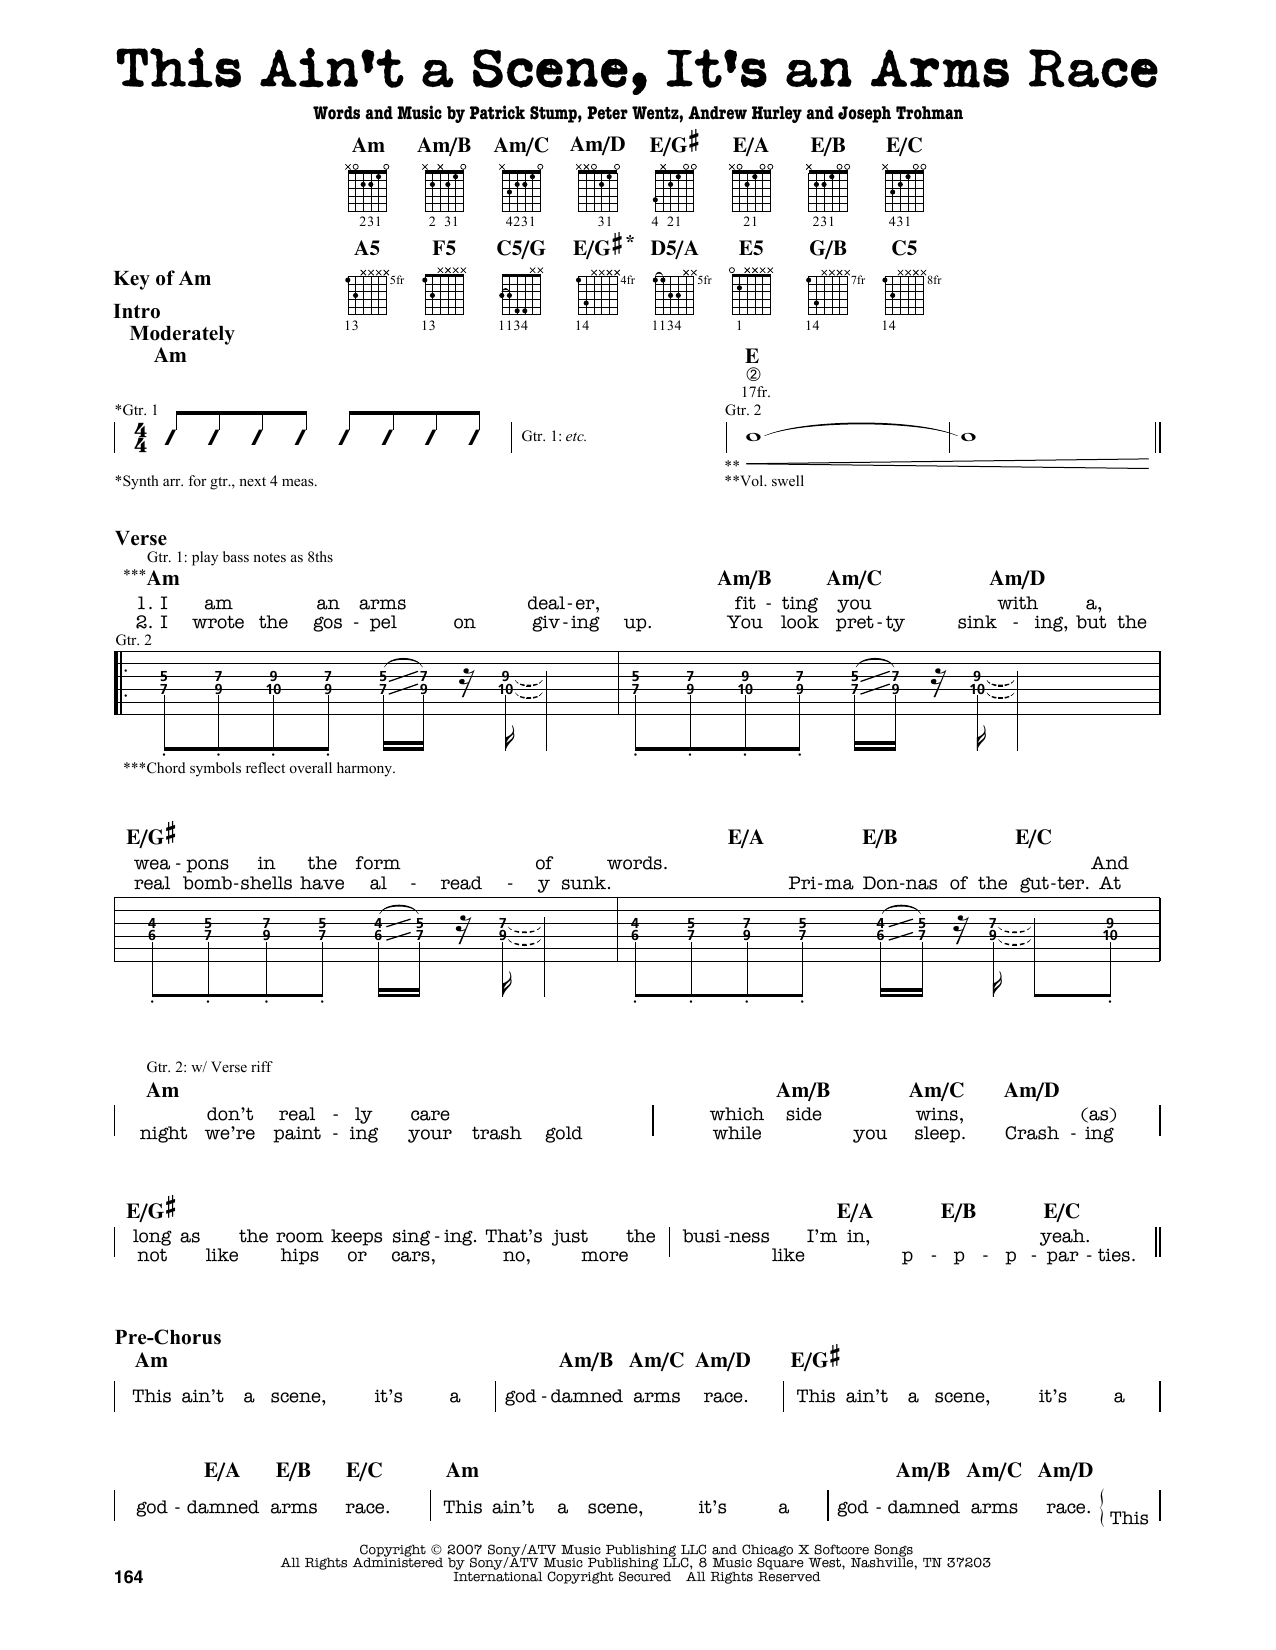 Download Fall Out Boy This Ain't A Scene, It's An Arms Race Sheet Music